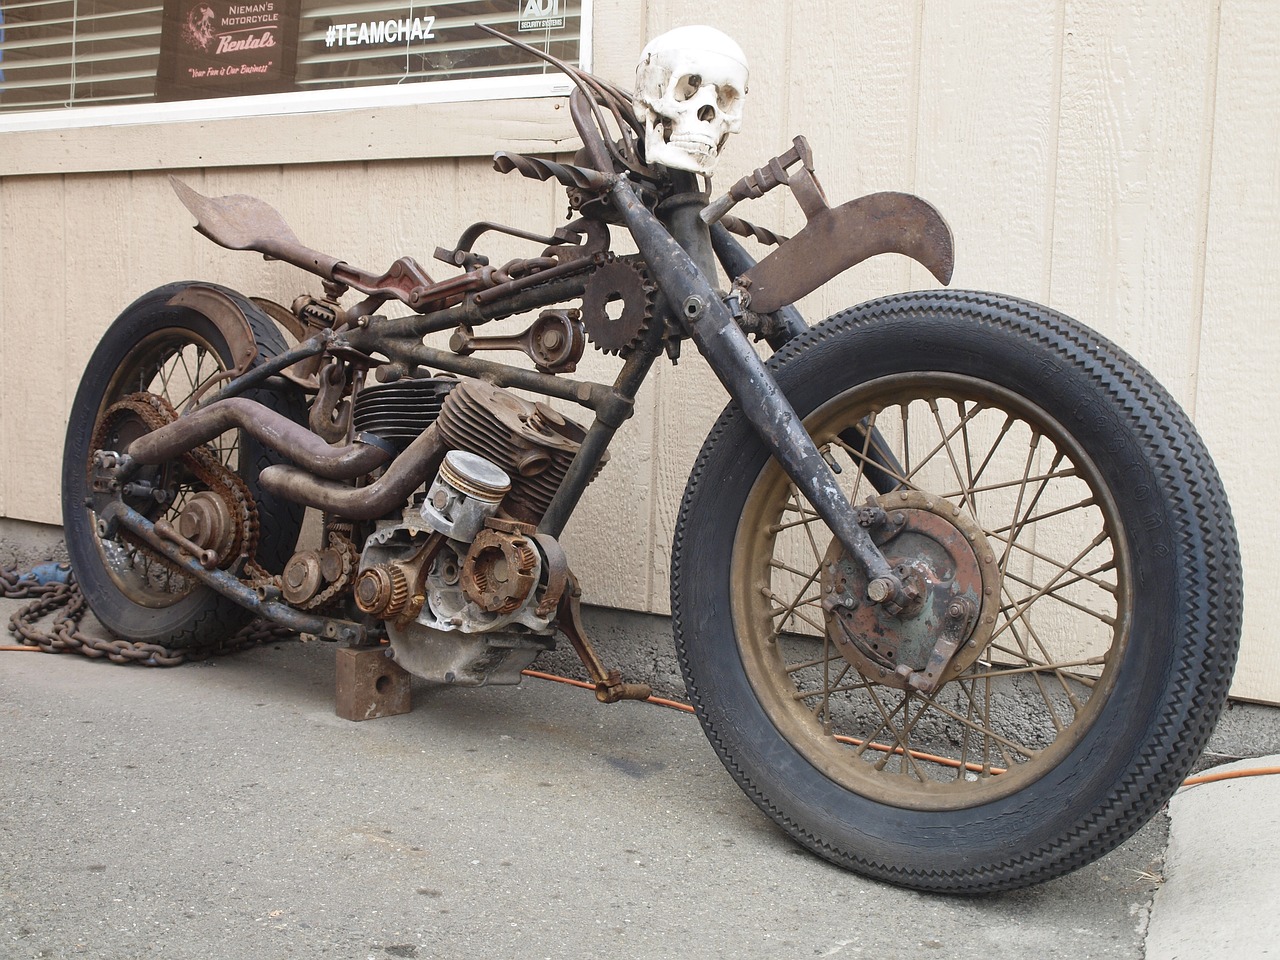 a close up of a motorcycle with a skull on it, flickr, dada, rusty components, junk on the ground, steam, bay area